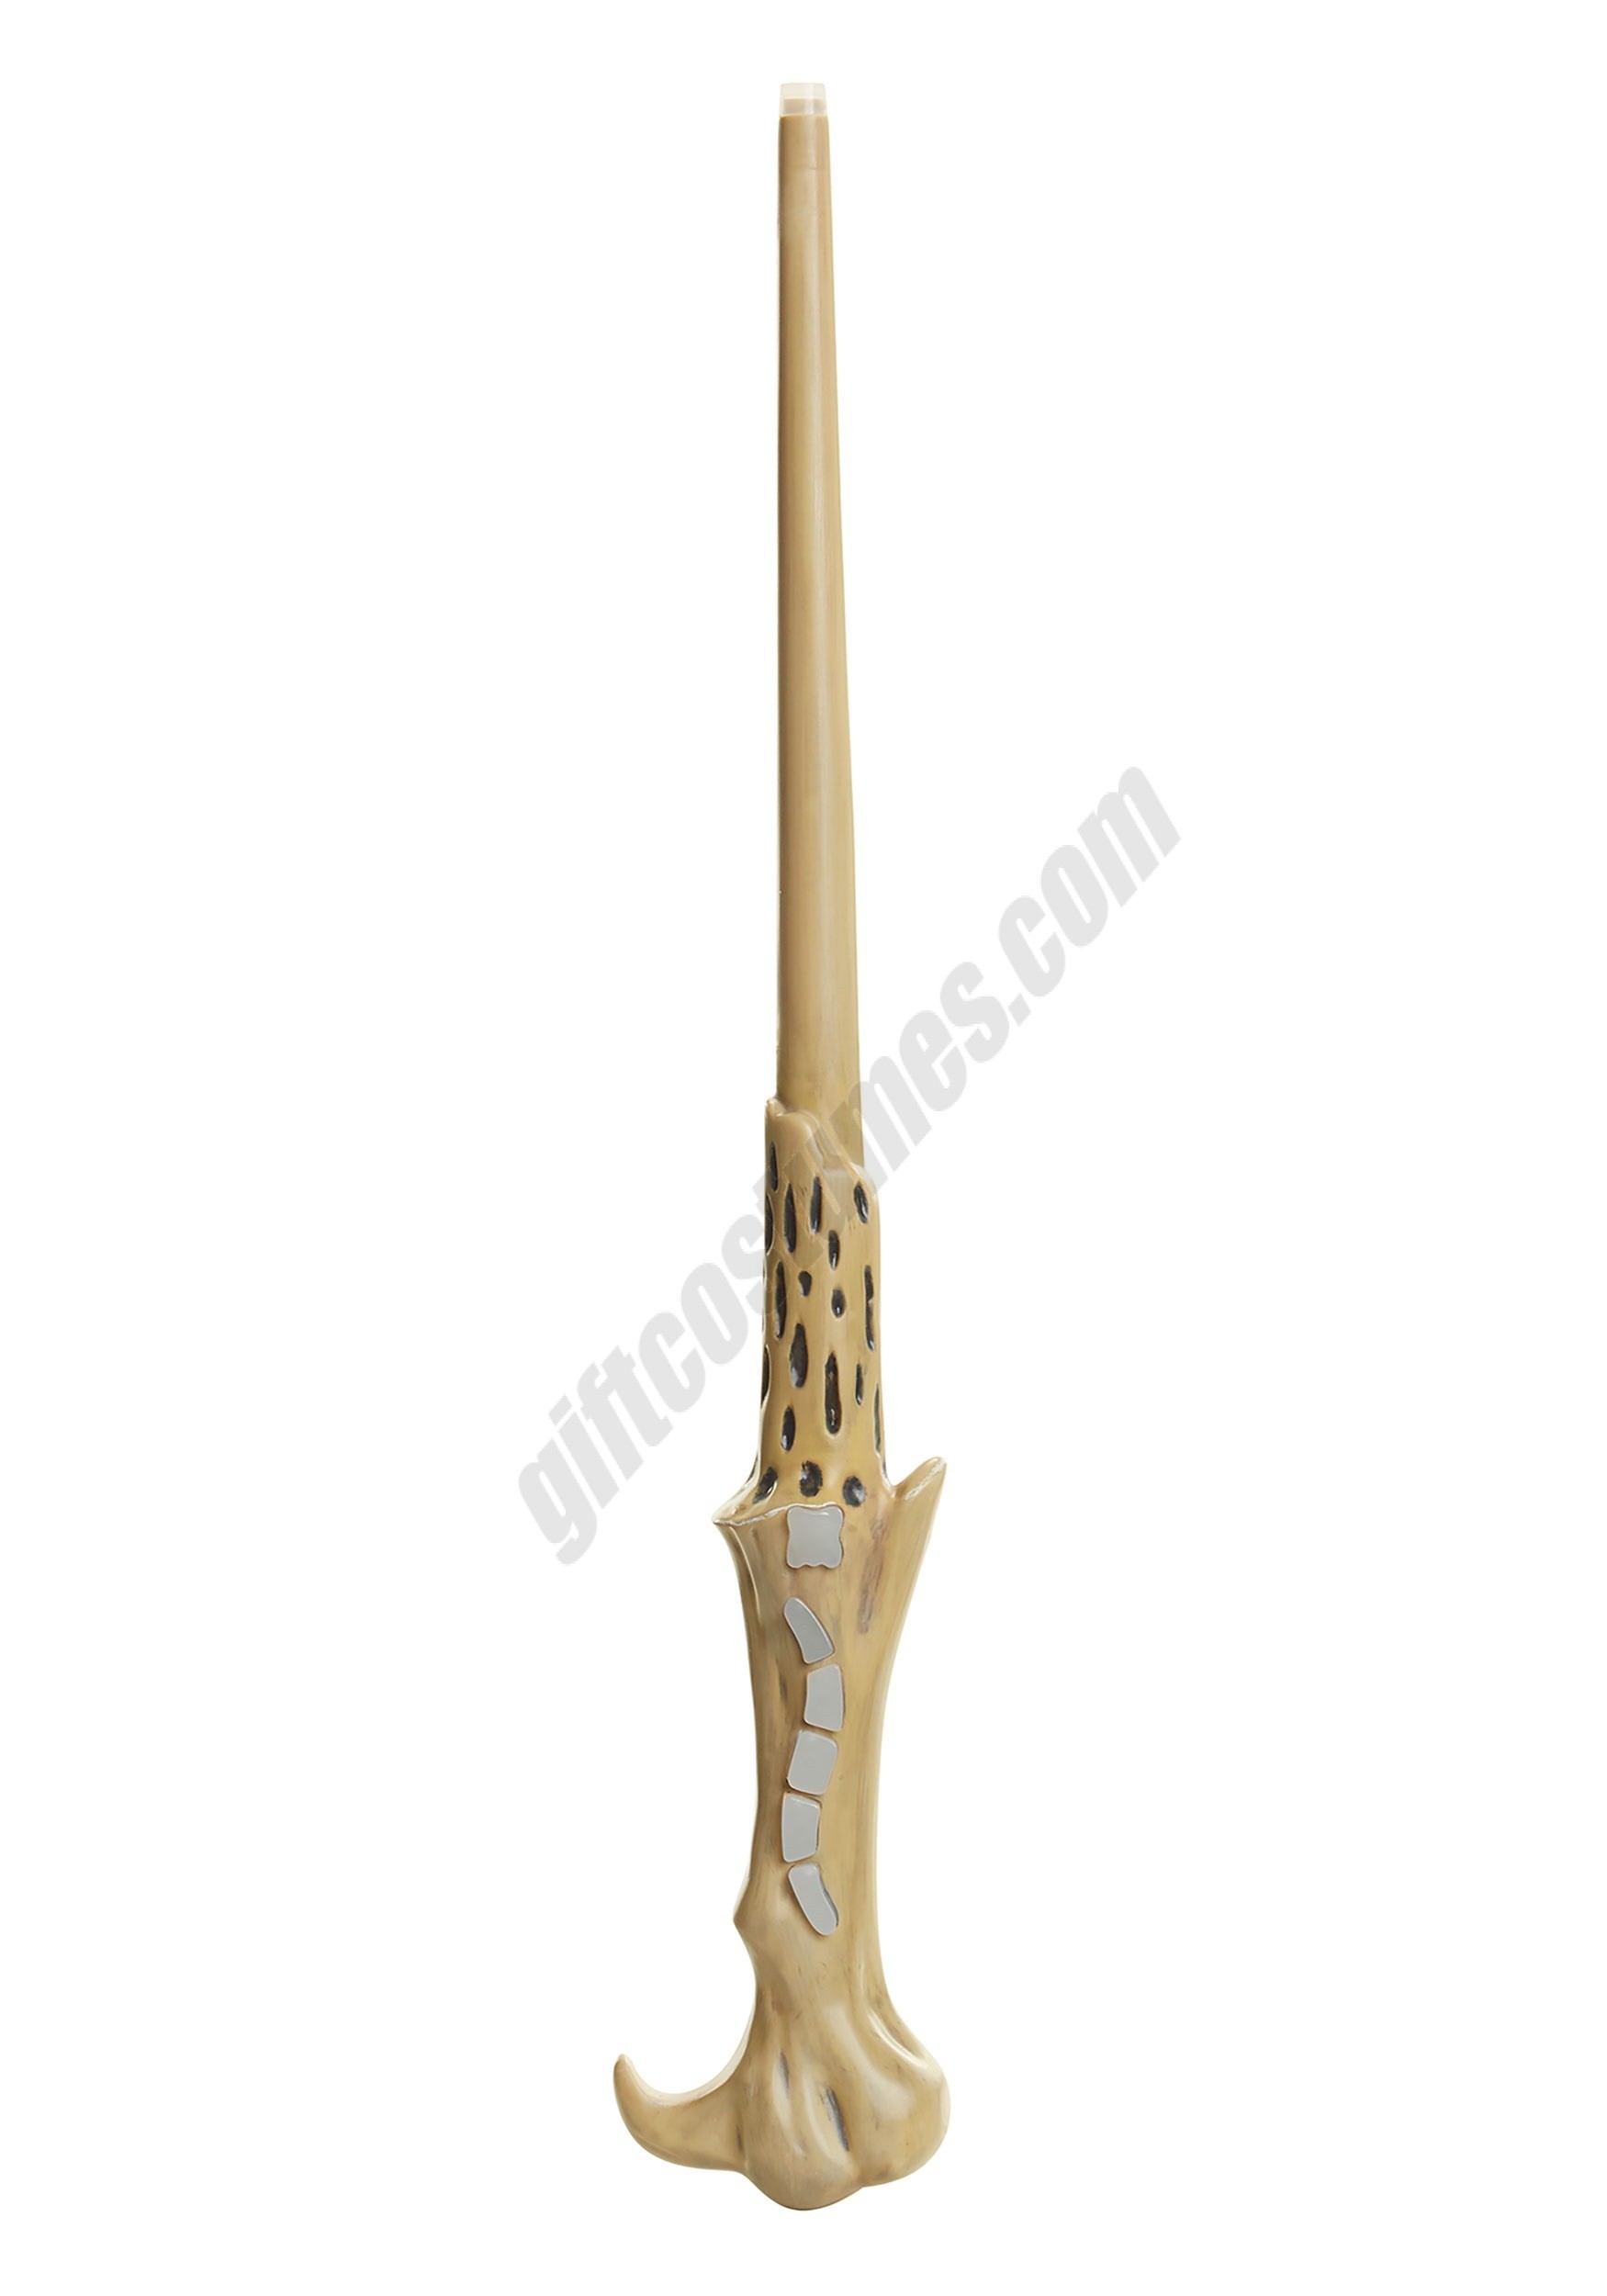 Voldemort Wand- Feature Wizard Wand Promotions - Voldemort Wand- Feature Wizard Wand Promotions